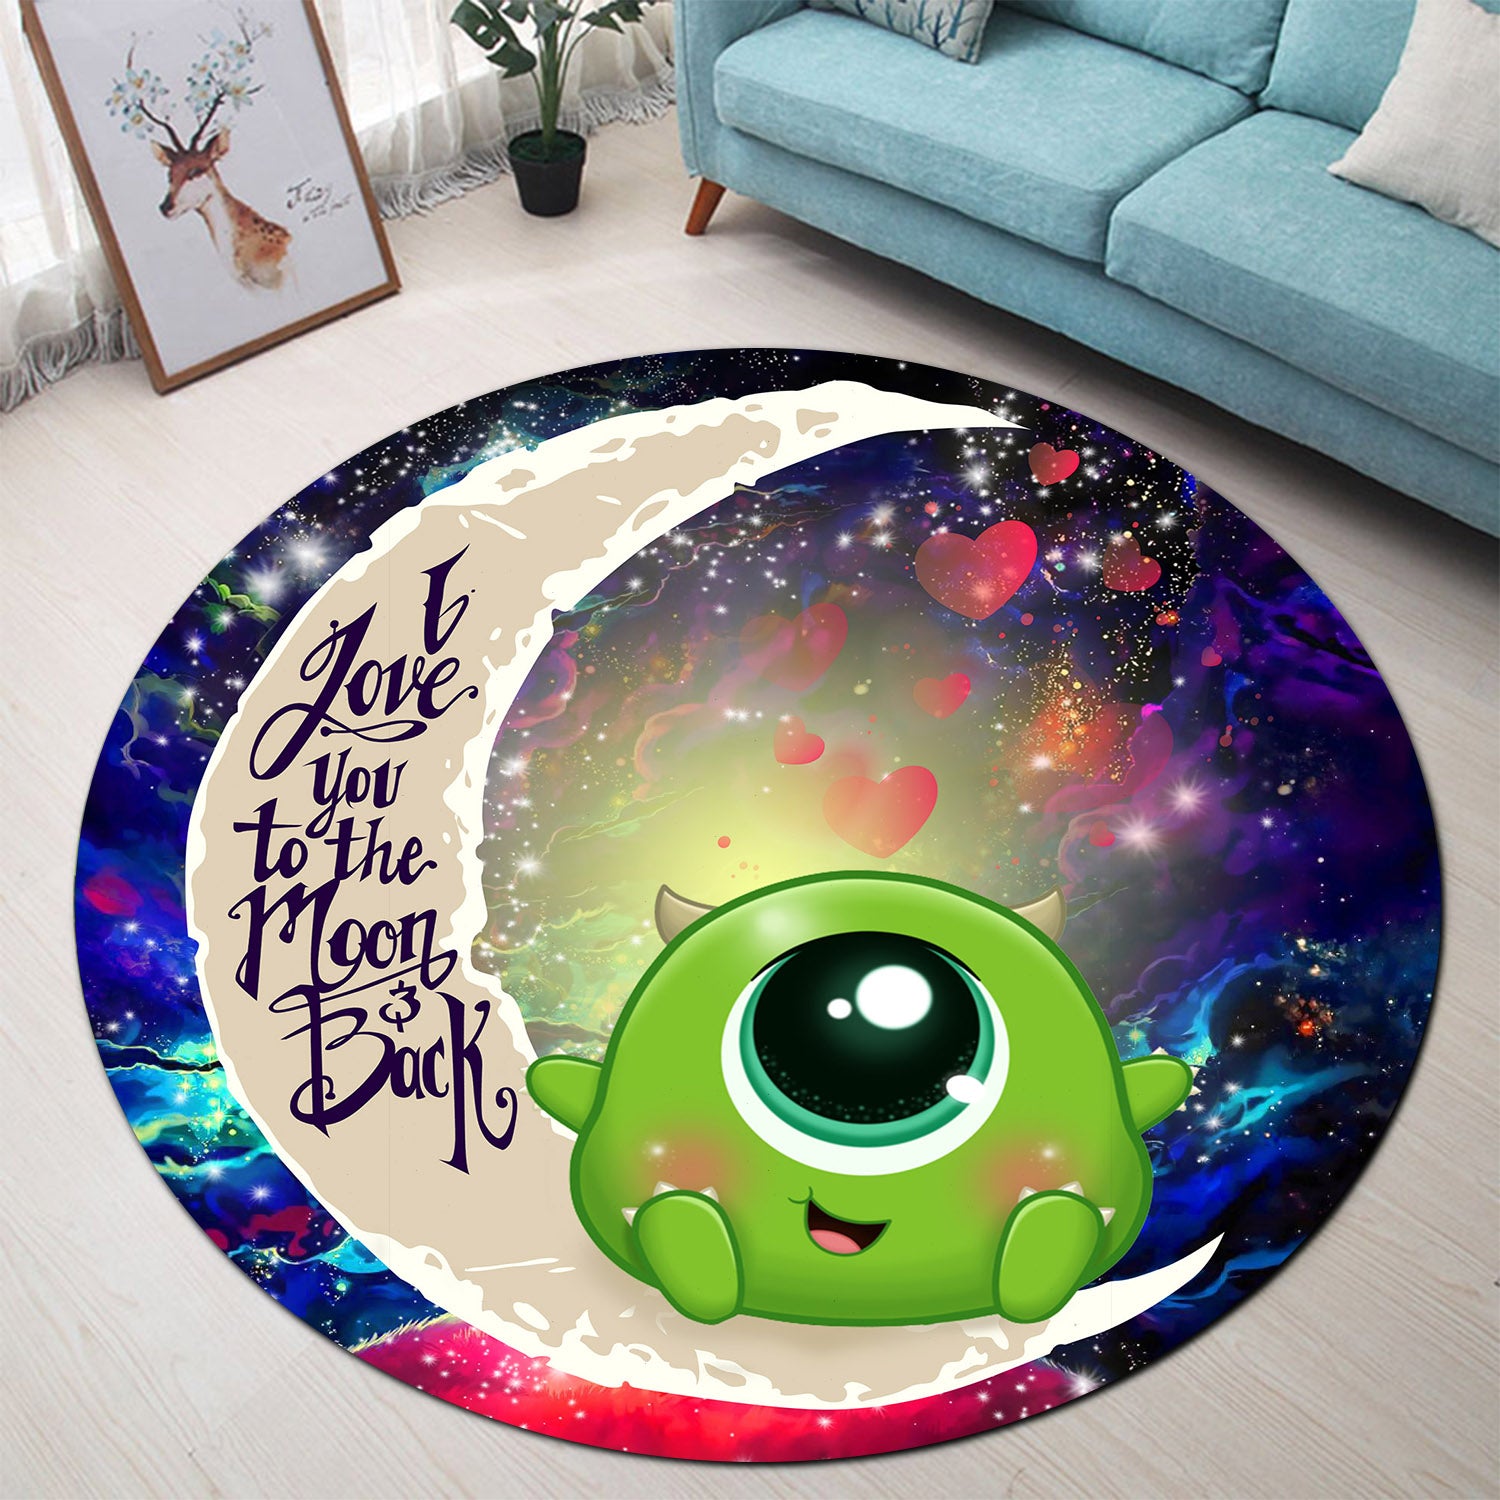 Cute Mike Monster Inc Love You To The Moon Galaxy Round Carpet Rug Bedroom Livingroom Home Decor Nearkii